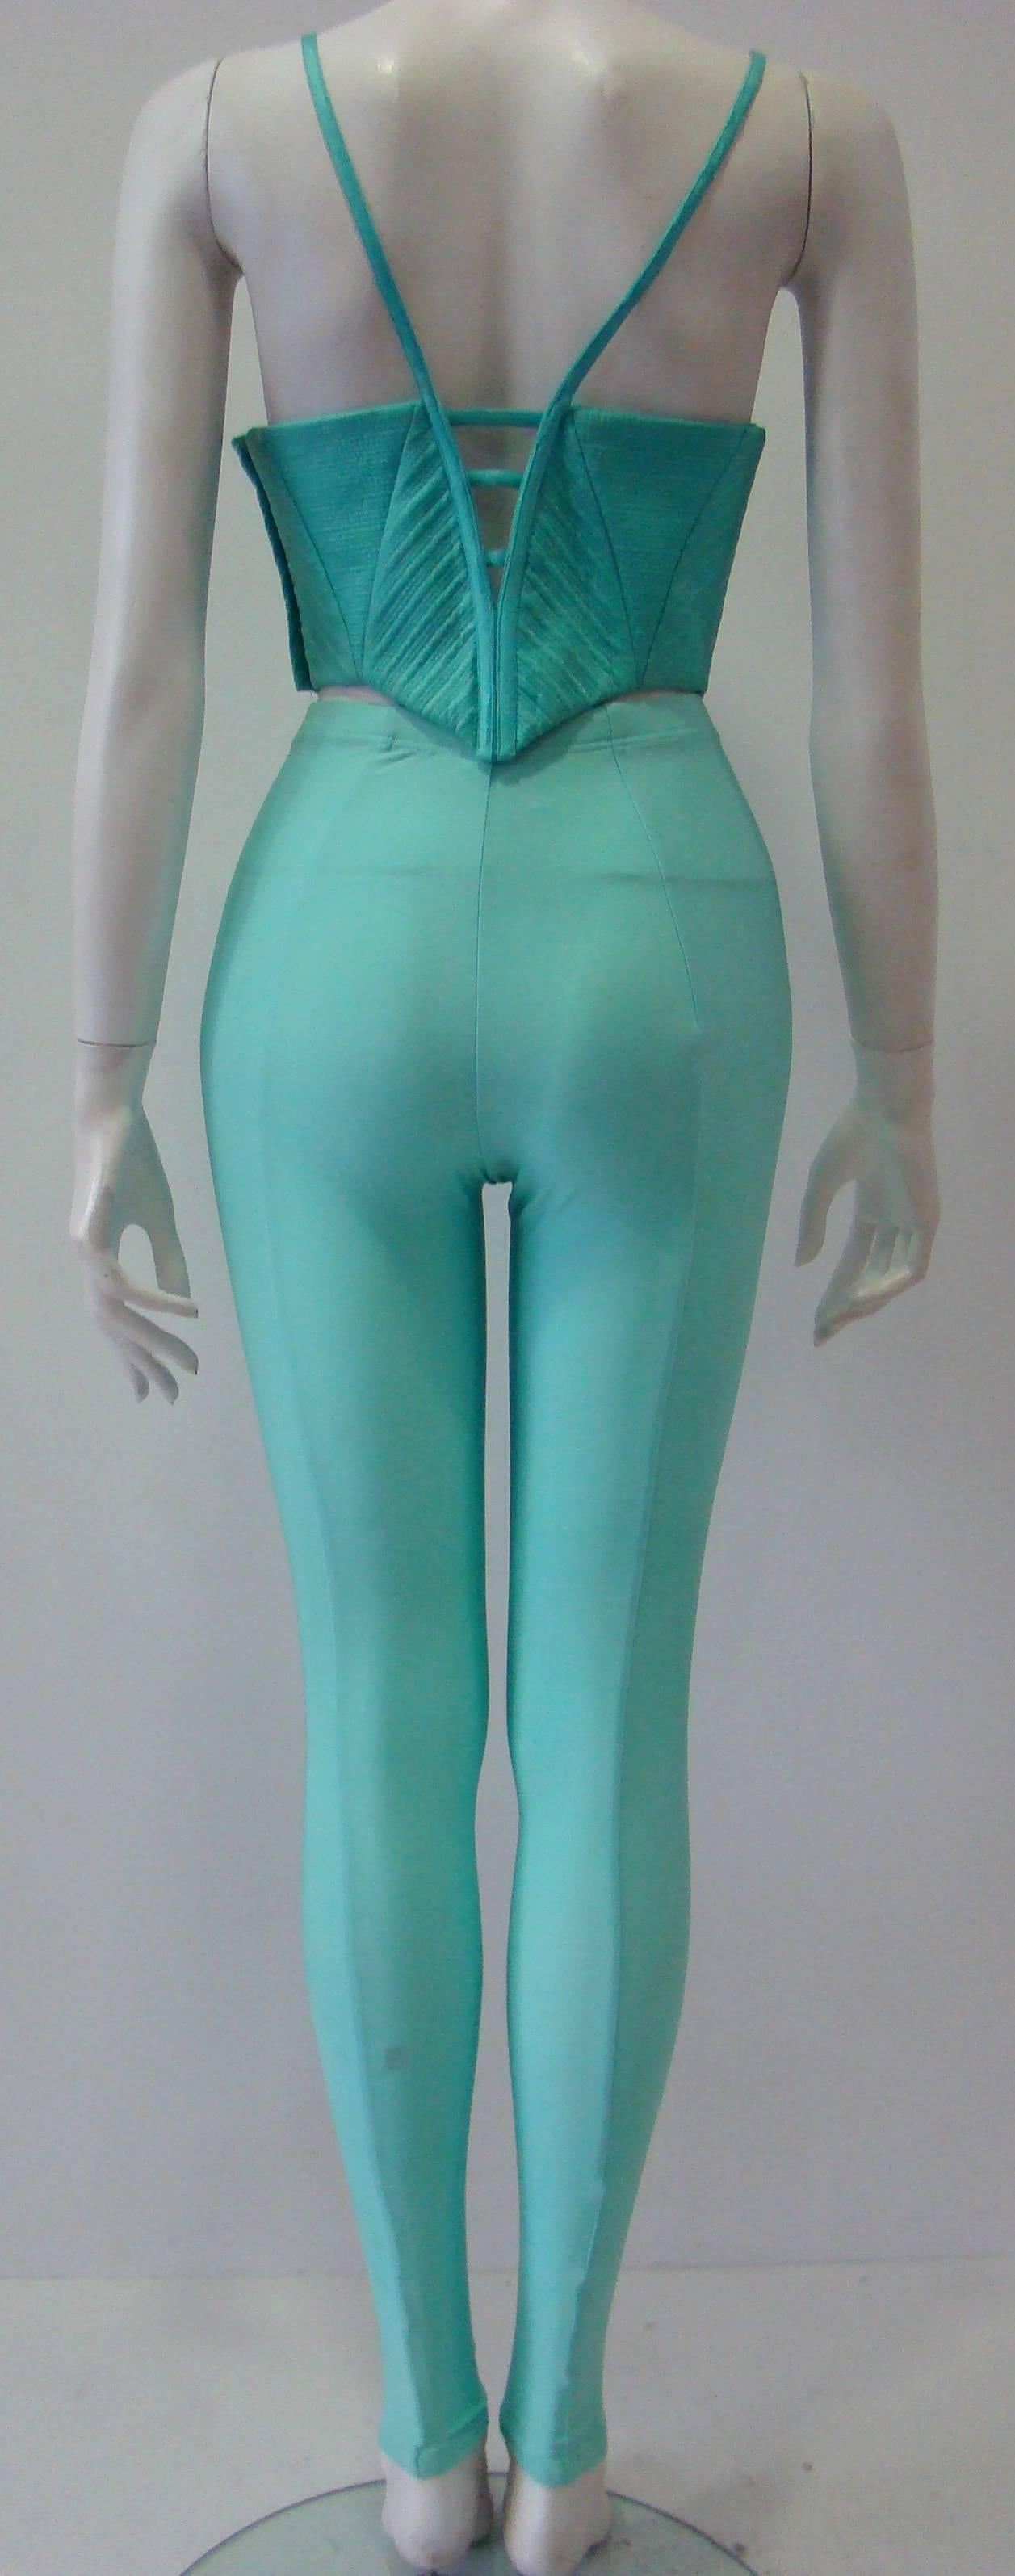 Women's Gianni Versace Couture Turquoise Stretch Leggings For Sale